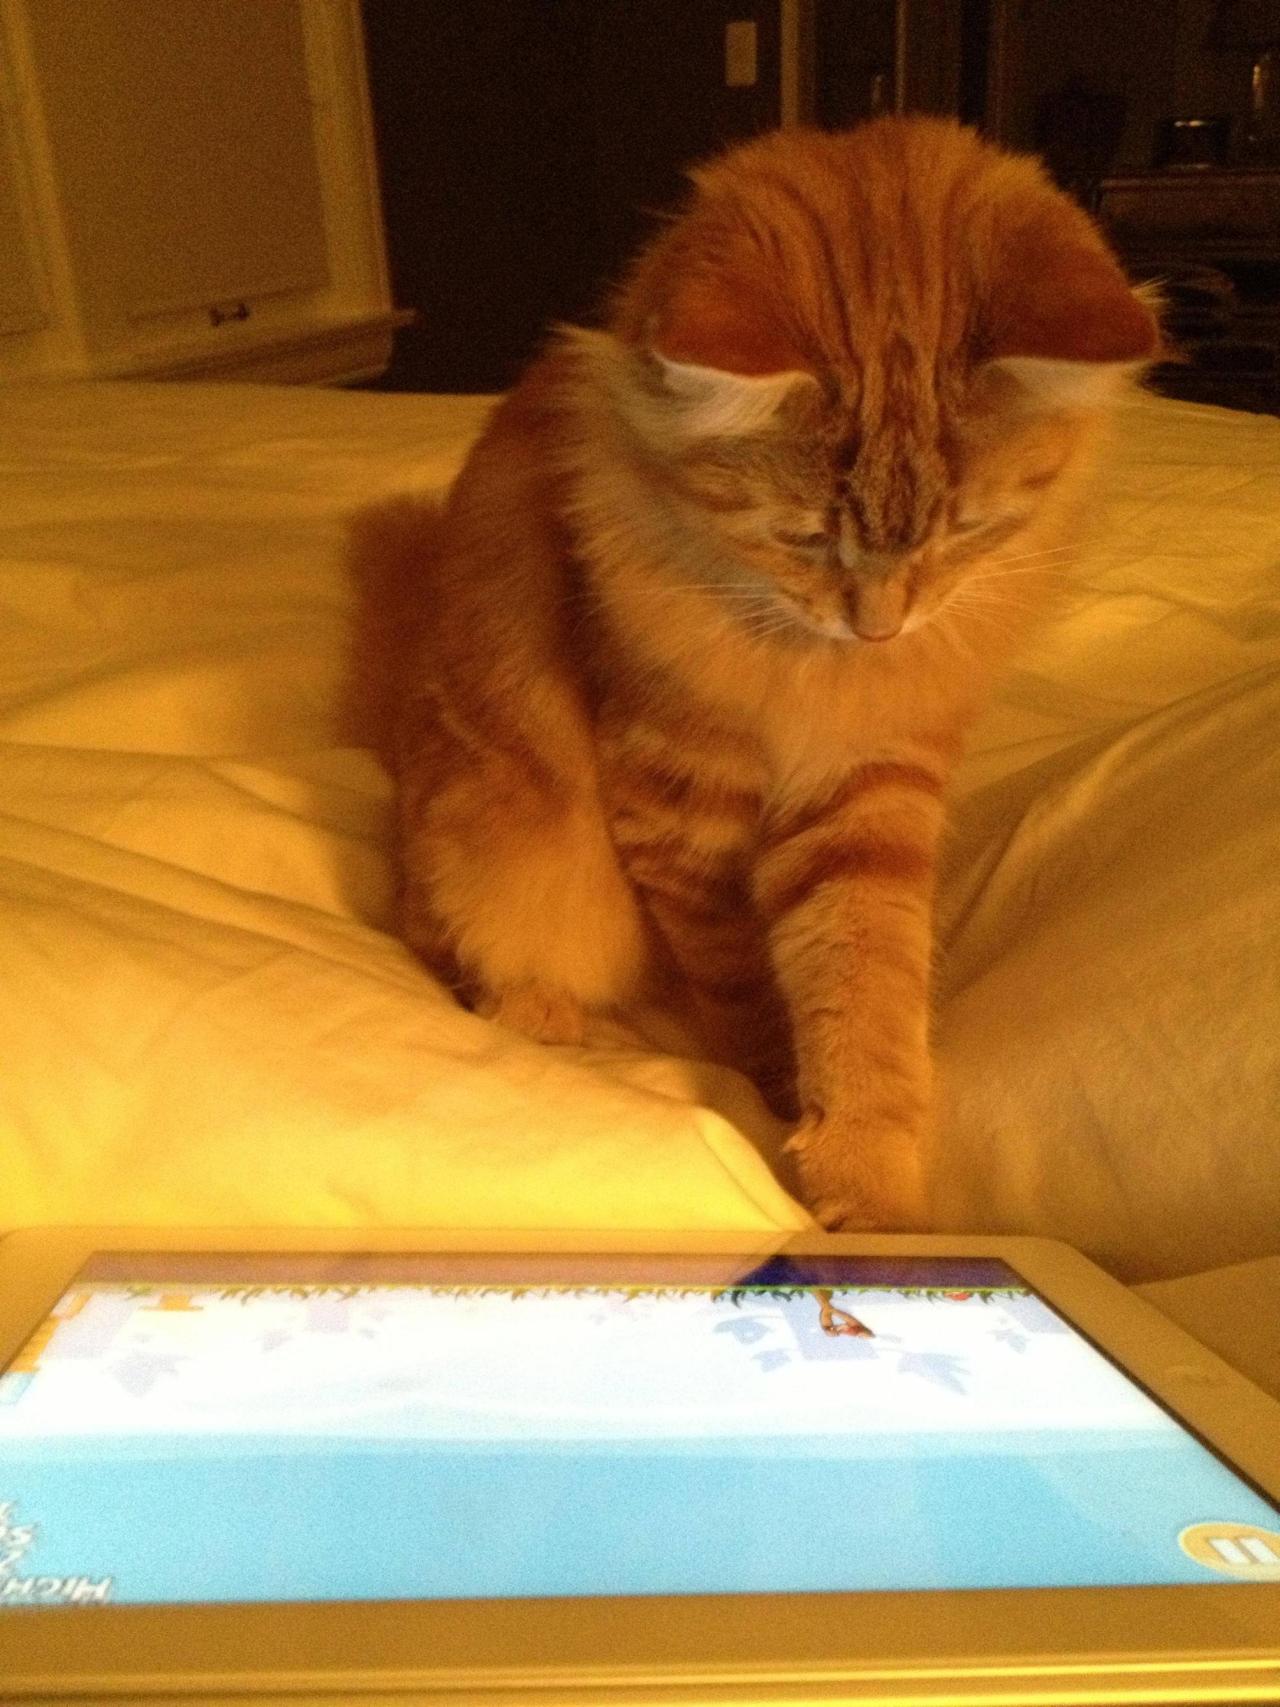 “I hate to admit it but I’m a little addicted to Angry Birds.” - says Ginger.
Photo by ©Hoyskel